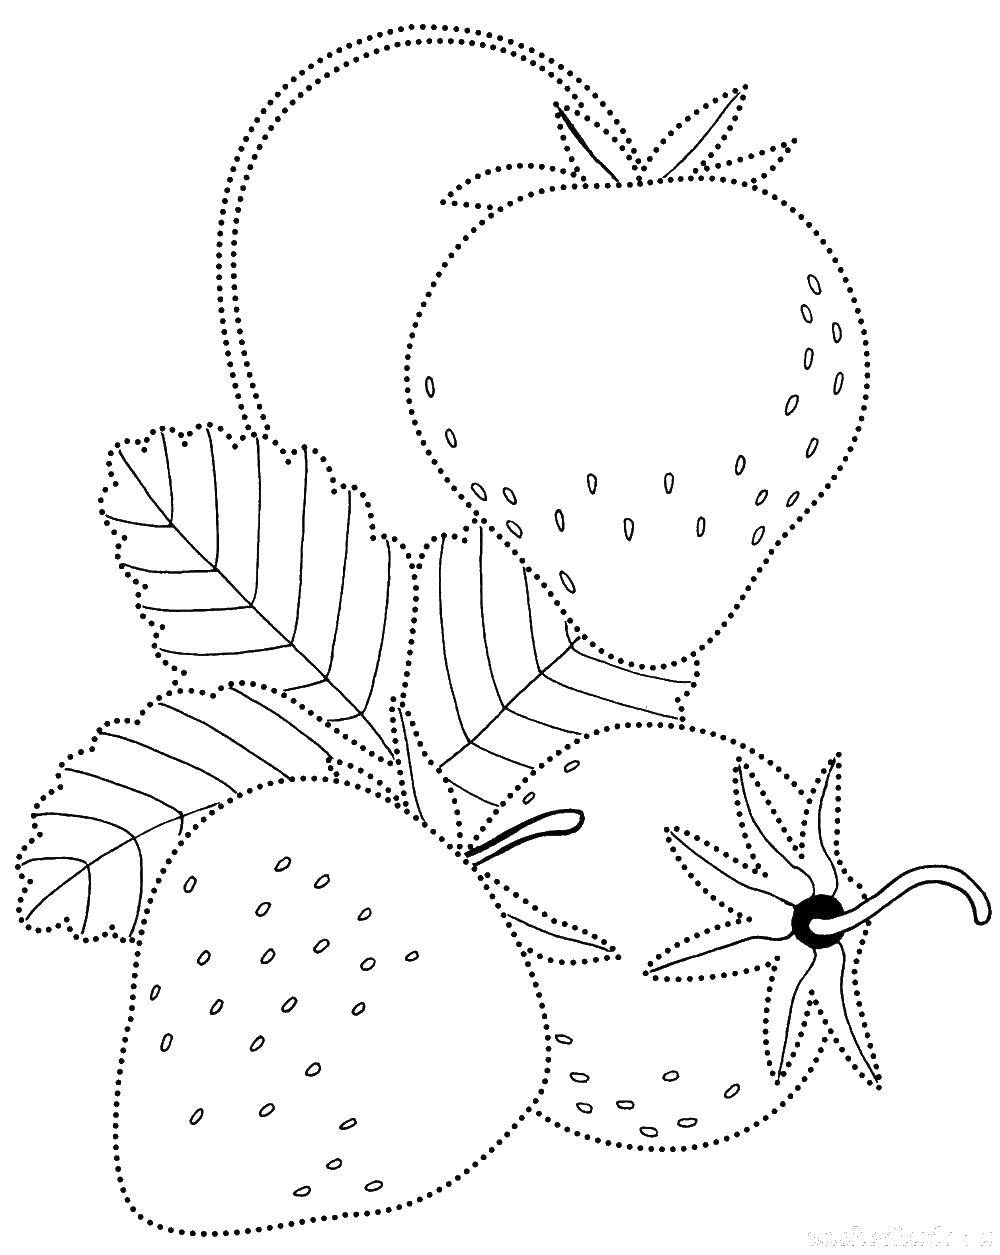 Coloring Trace the contour and color of strawberries. Category fix on the model. Tags:  Pattern , stroke path.